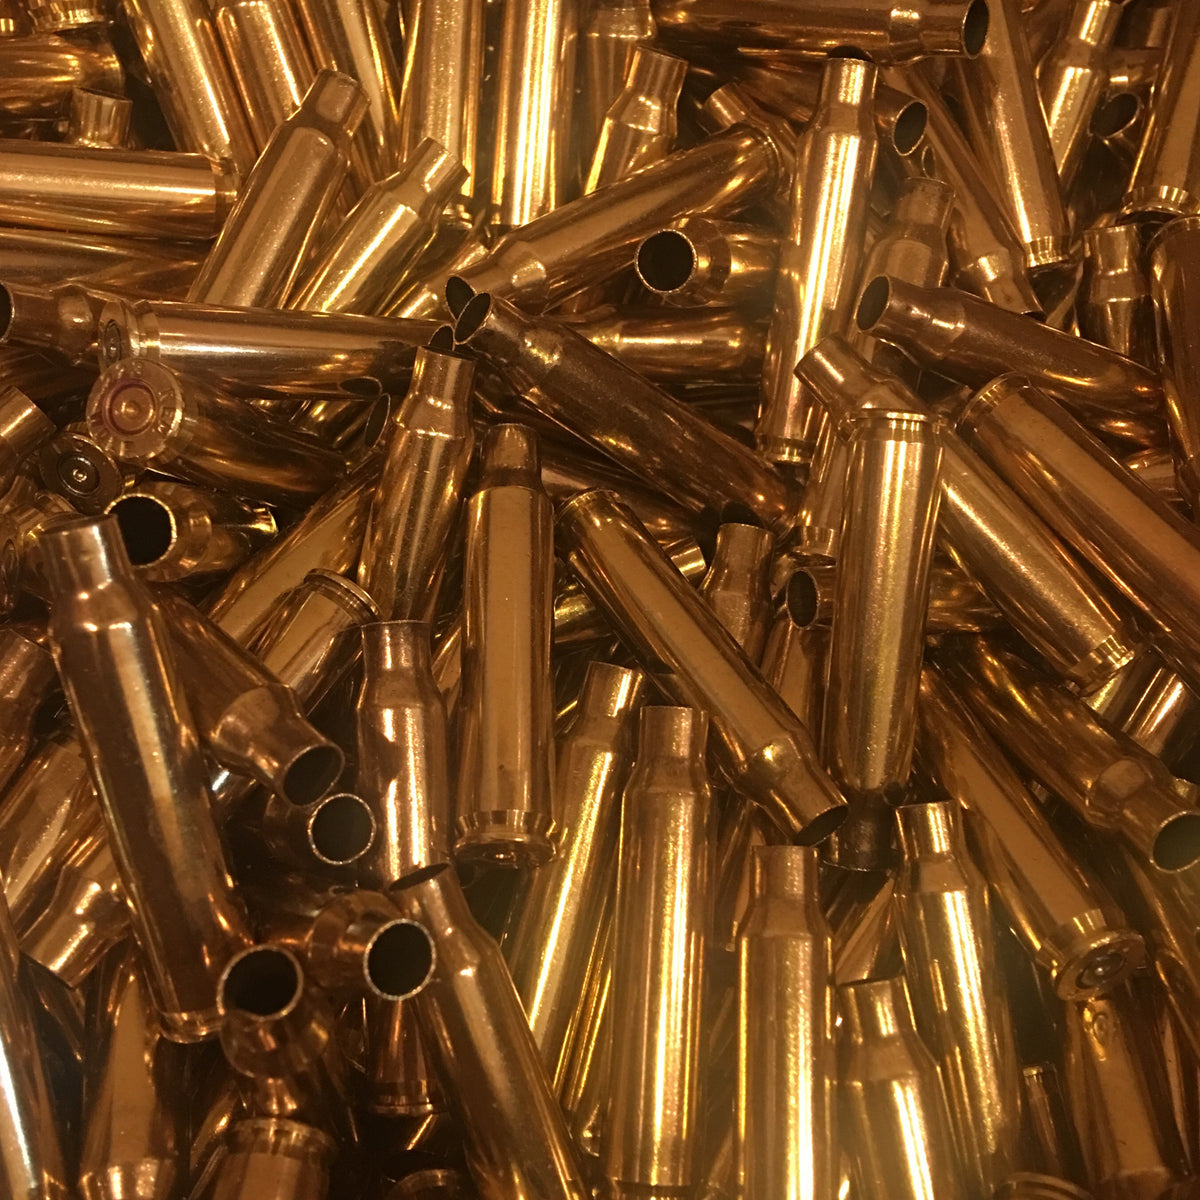 New Brass vs. Once-Fired Brass - What's the Difference? – Top Brass  Reloading Supplies